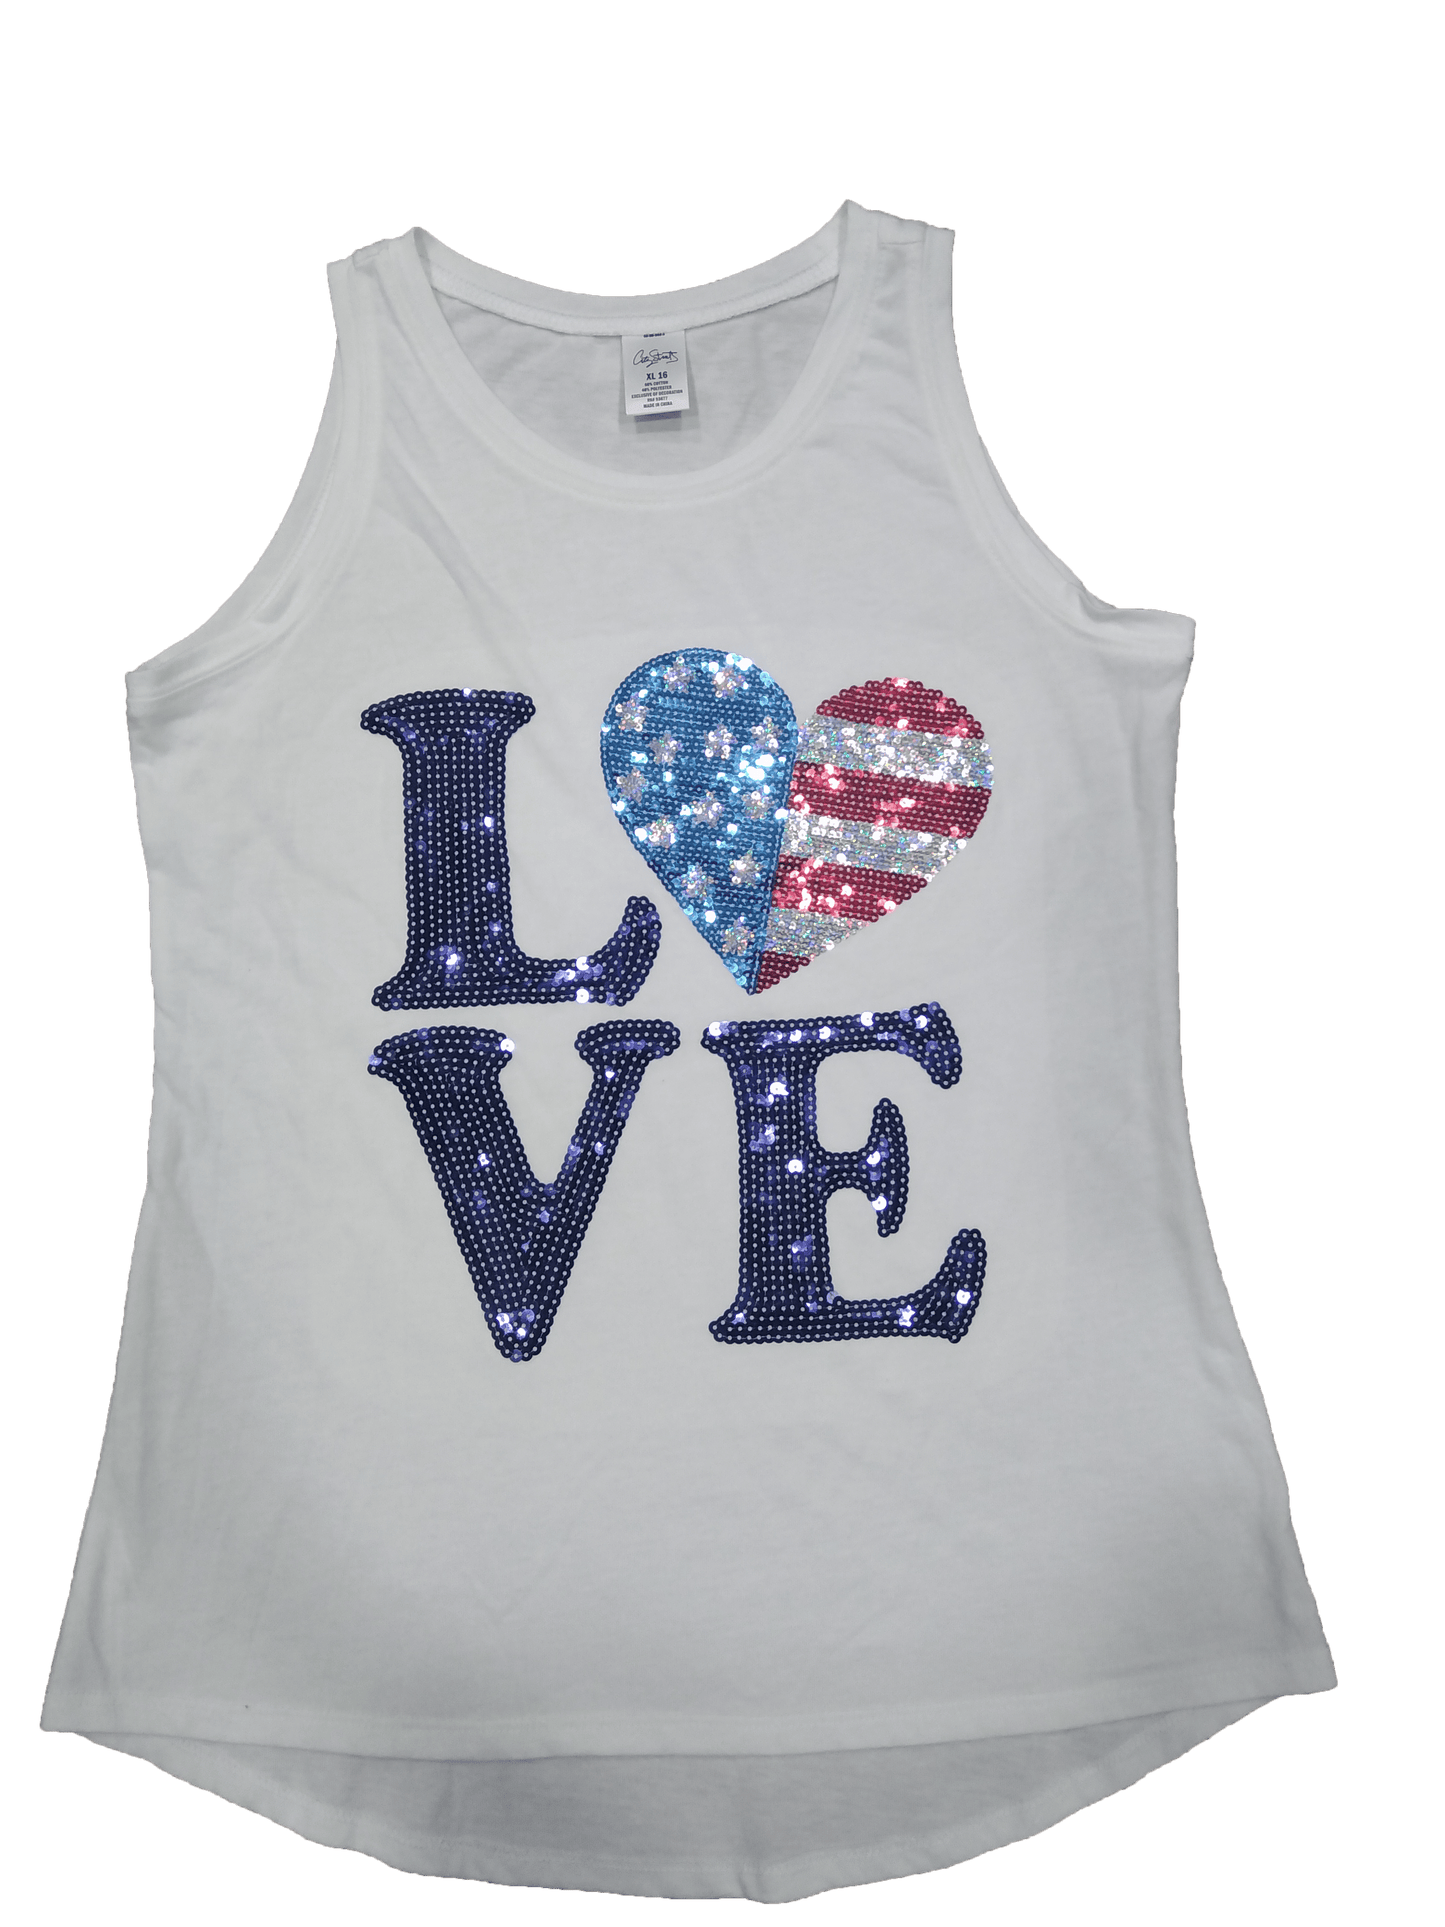 City Streets Apparel 16 Years Kids - Sequin Love Tank Top